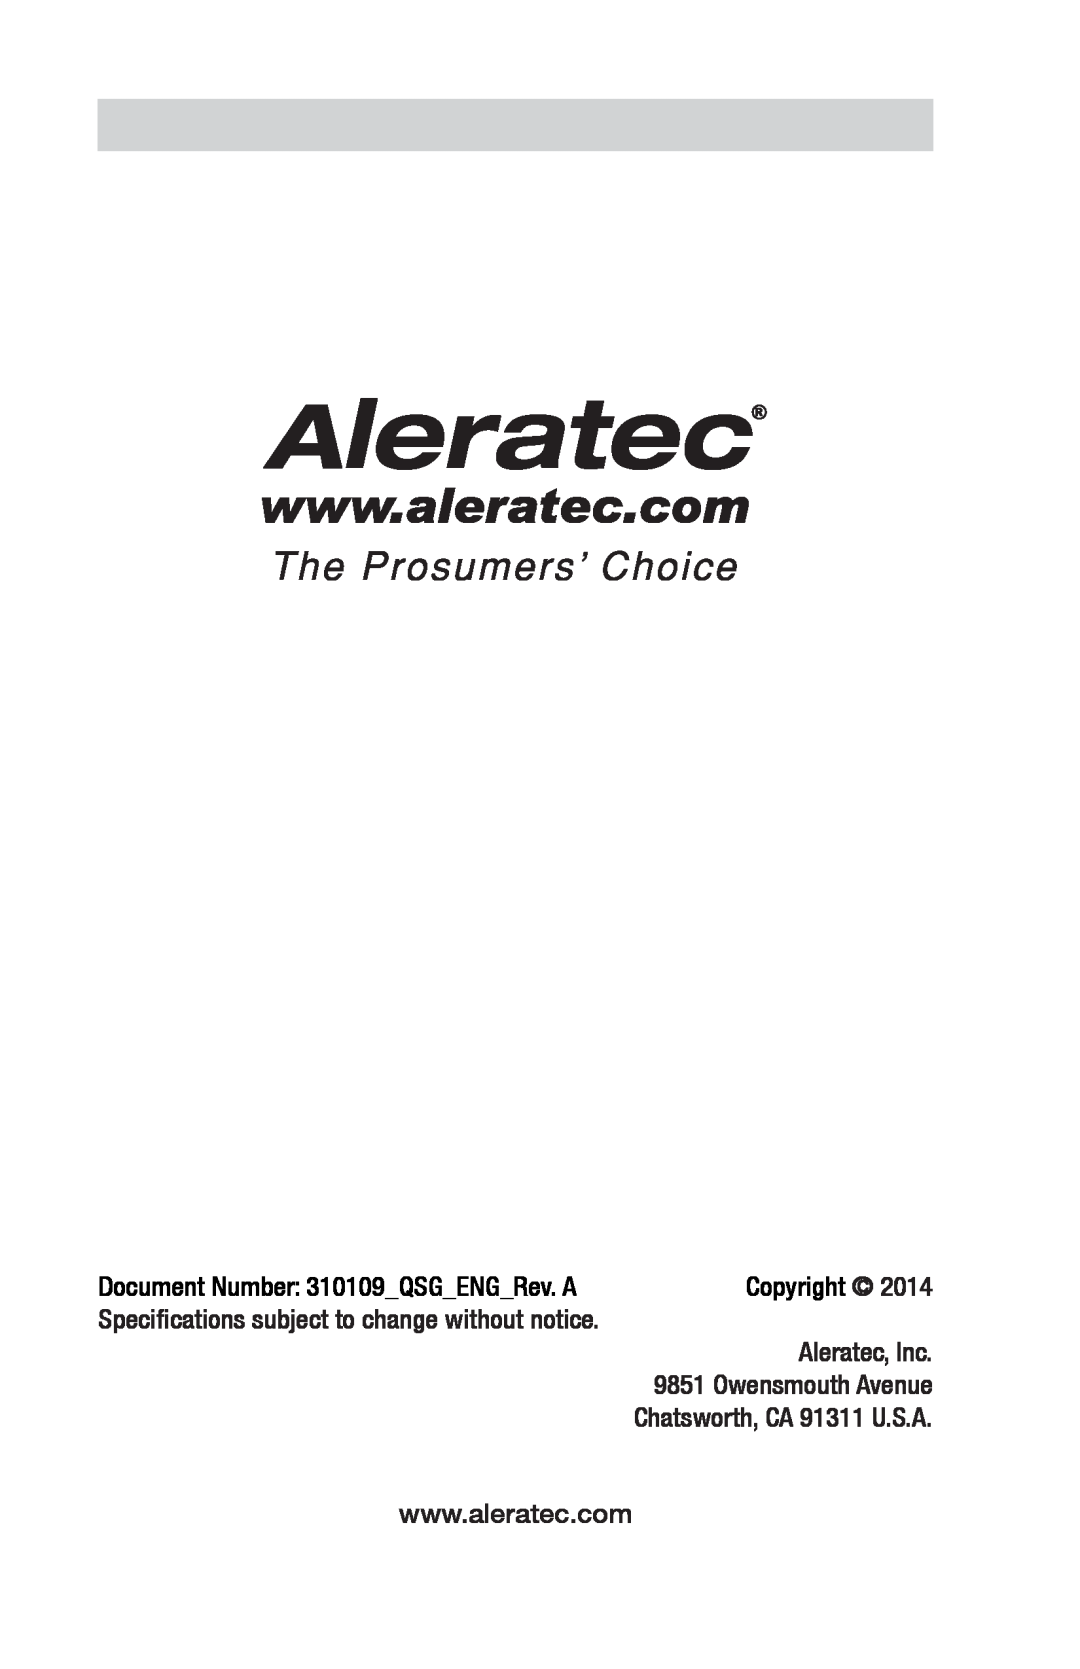 Aleratec Document Number 310109QSGENGRev. A, Specifications subject to change without notice, Copyright, Aleratec, Inc 